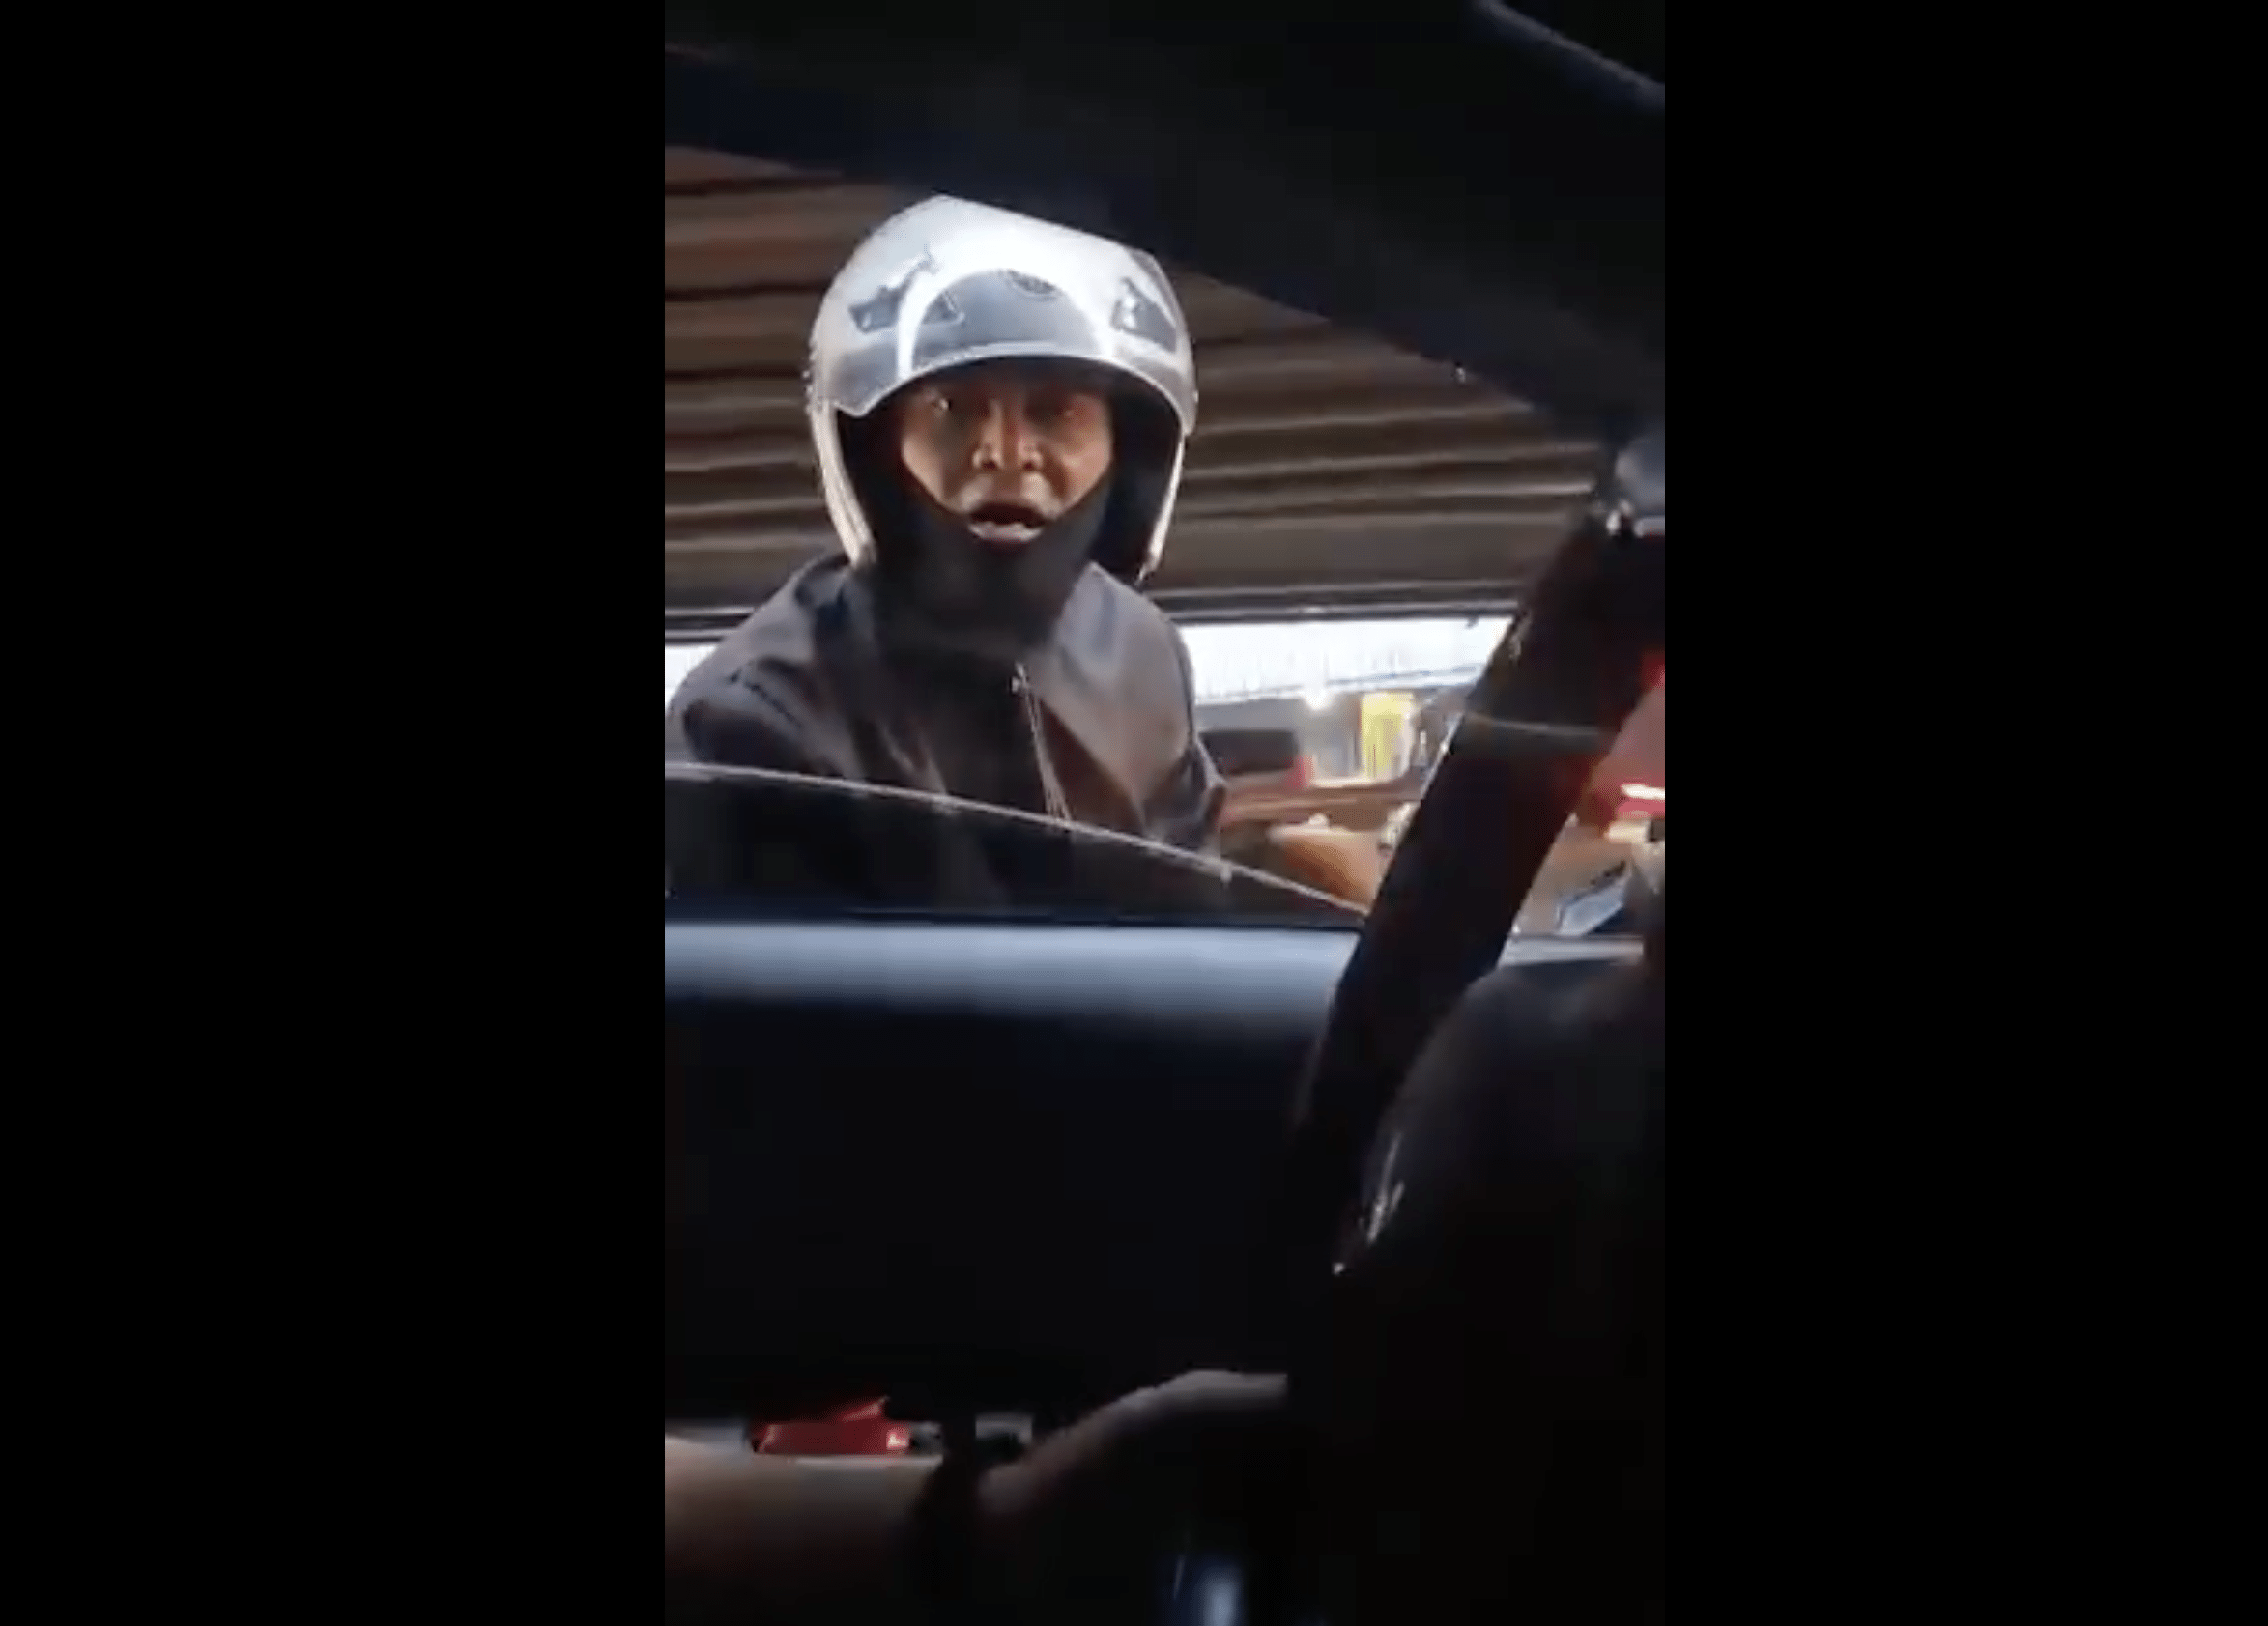 Metropolitan Manila Development Authority (MMDA) Chairman Don Artes pledged a reward on Tuesday for the first person to identify the individual who claimed to be an MMDA enforcer to extort money from a motorist in Makati City.